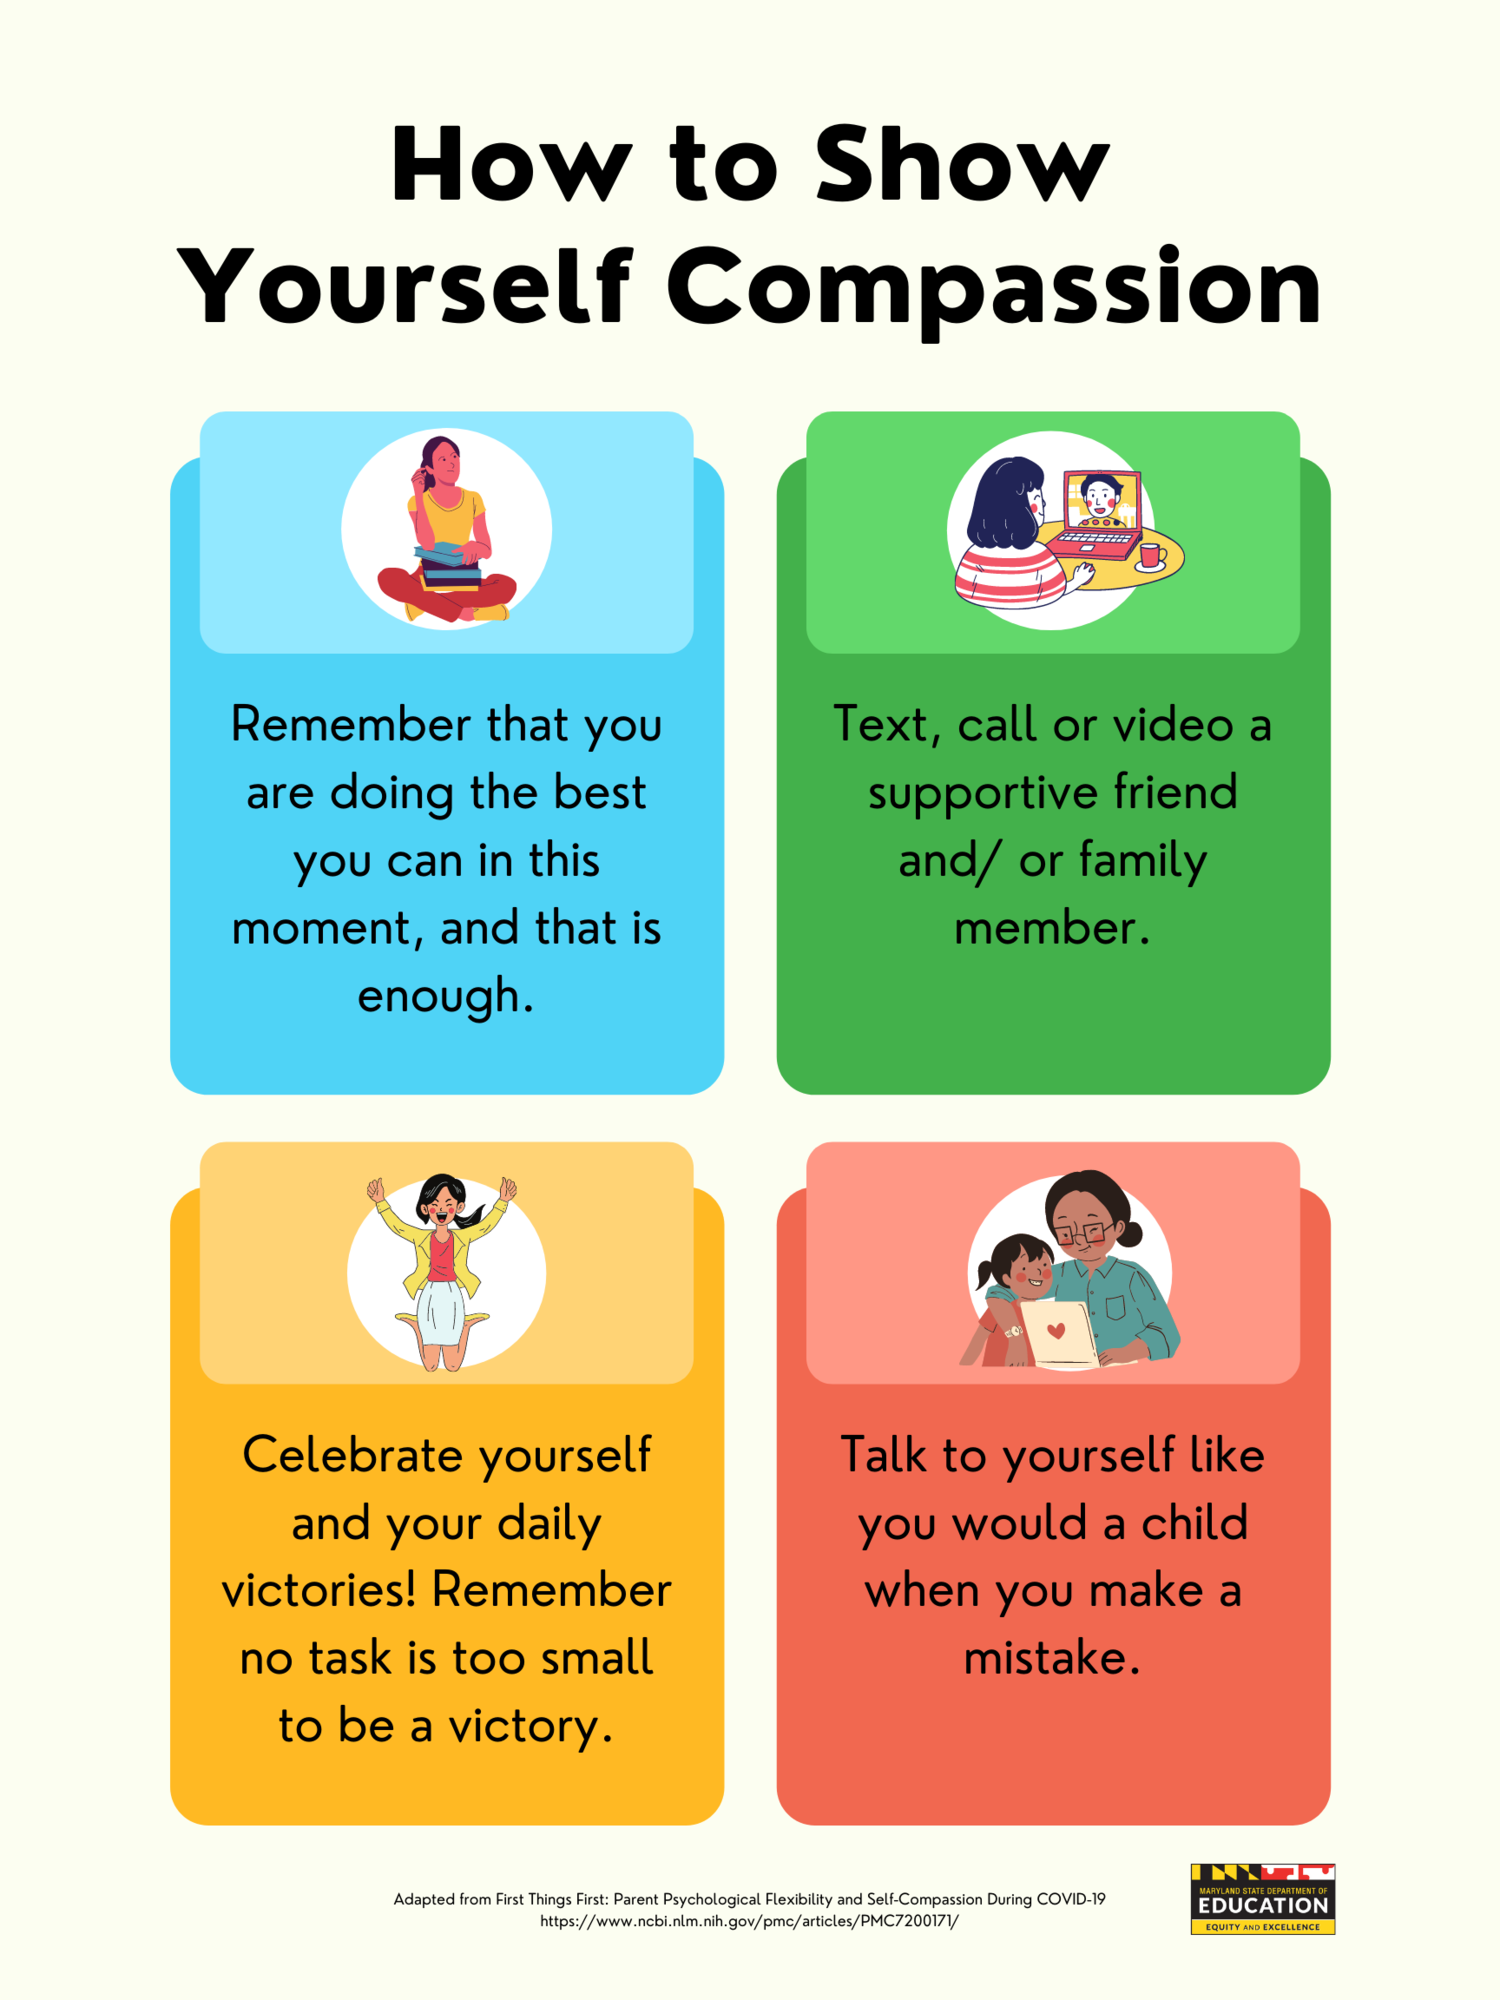 How to Show Yourself Compassion